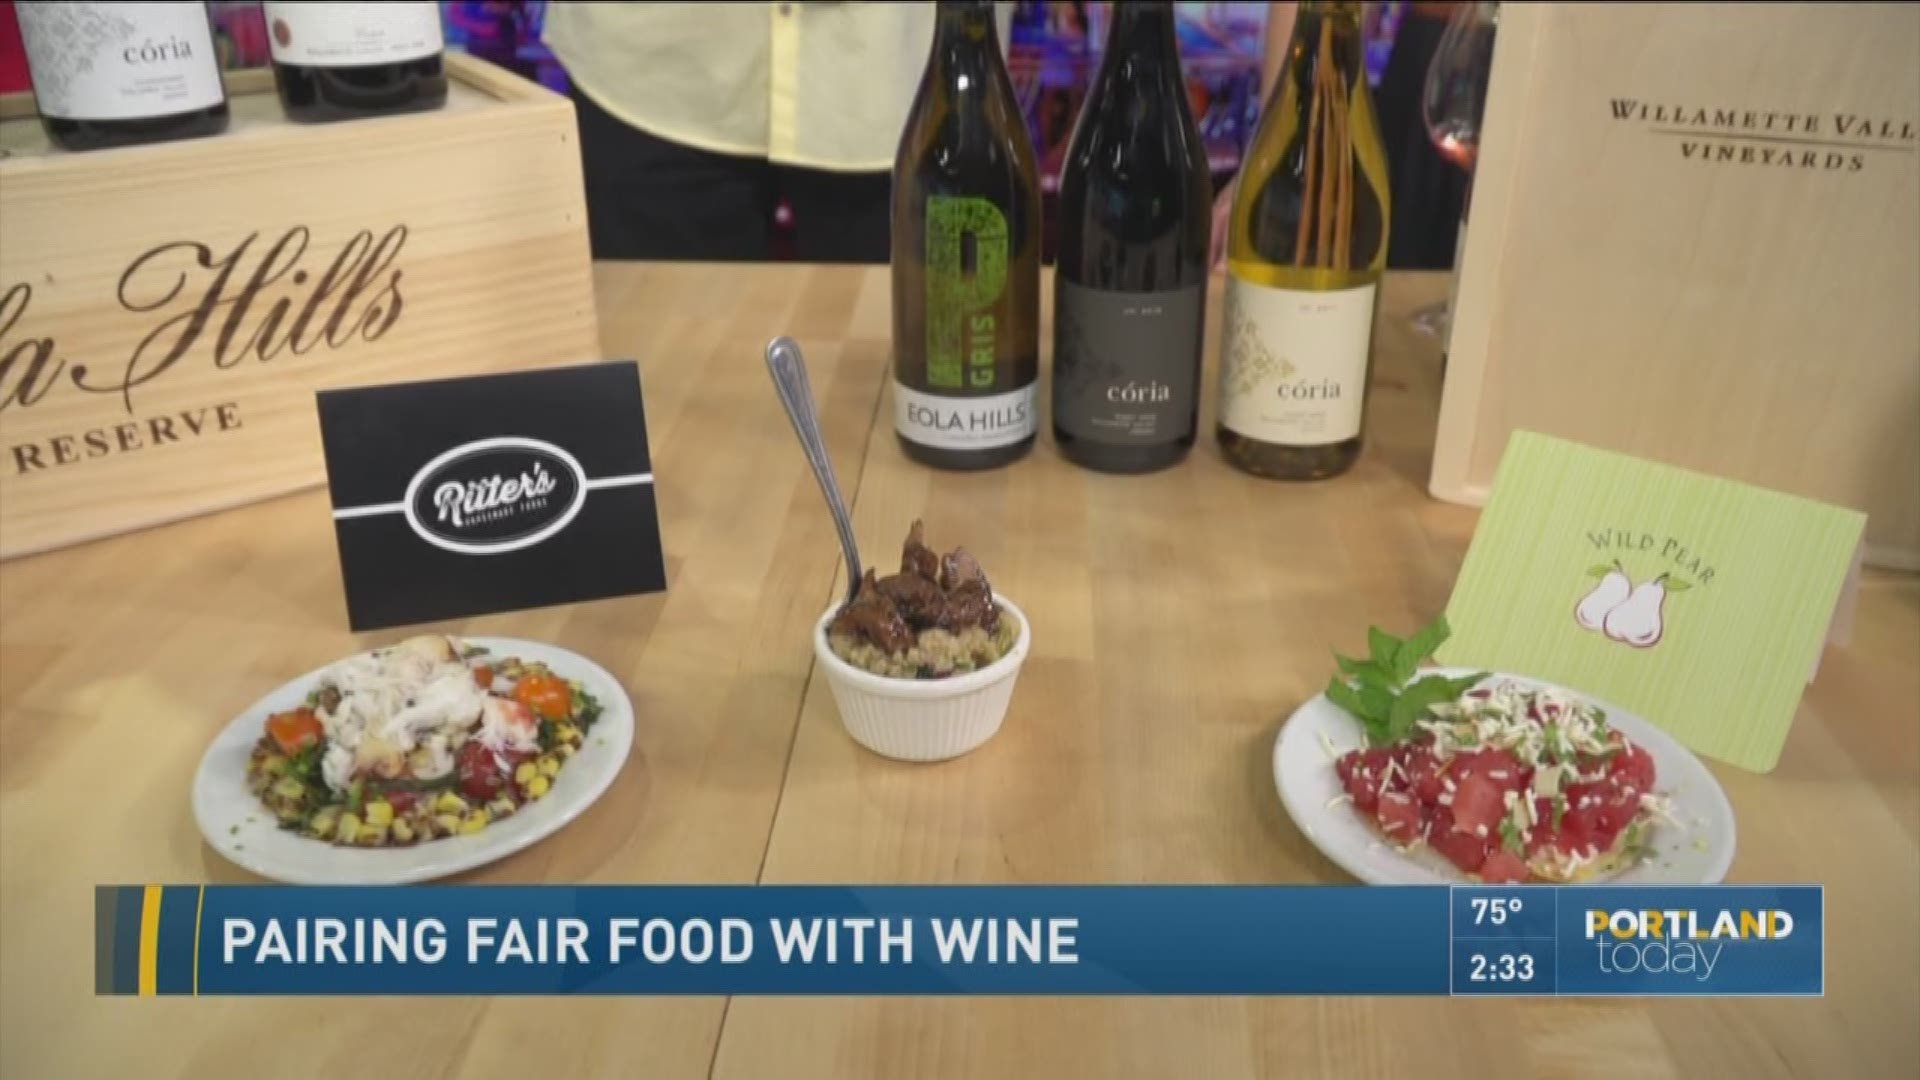 Pairing fair food with wine